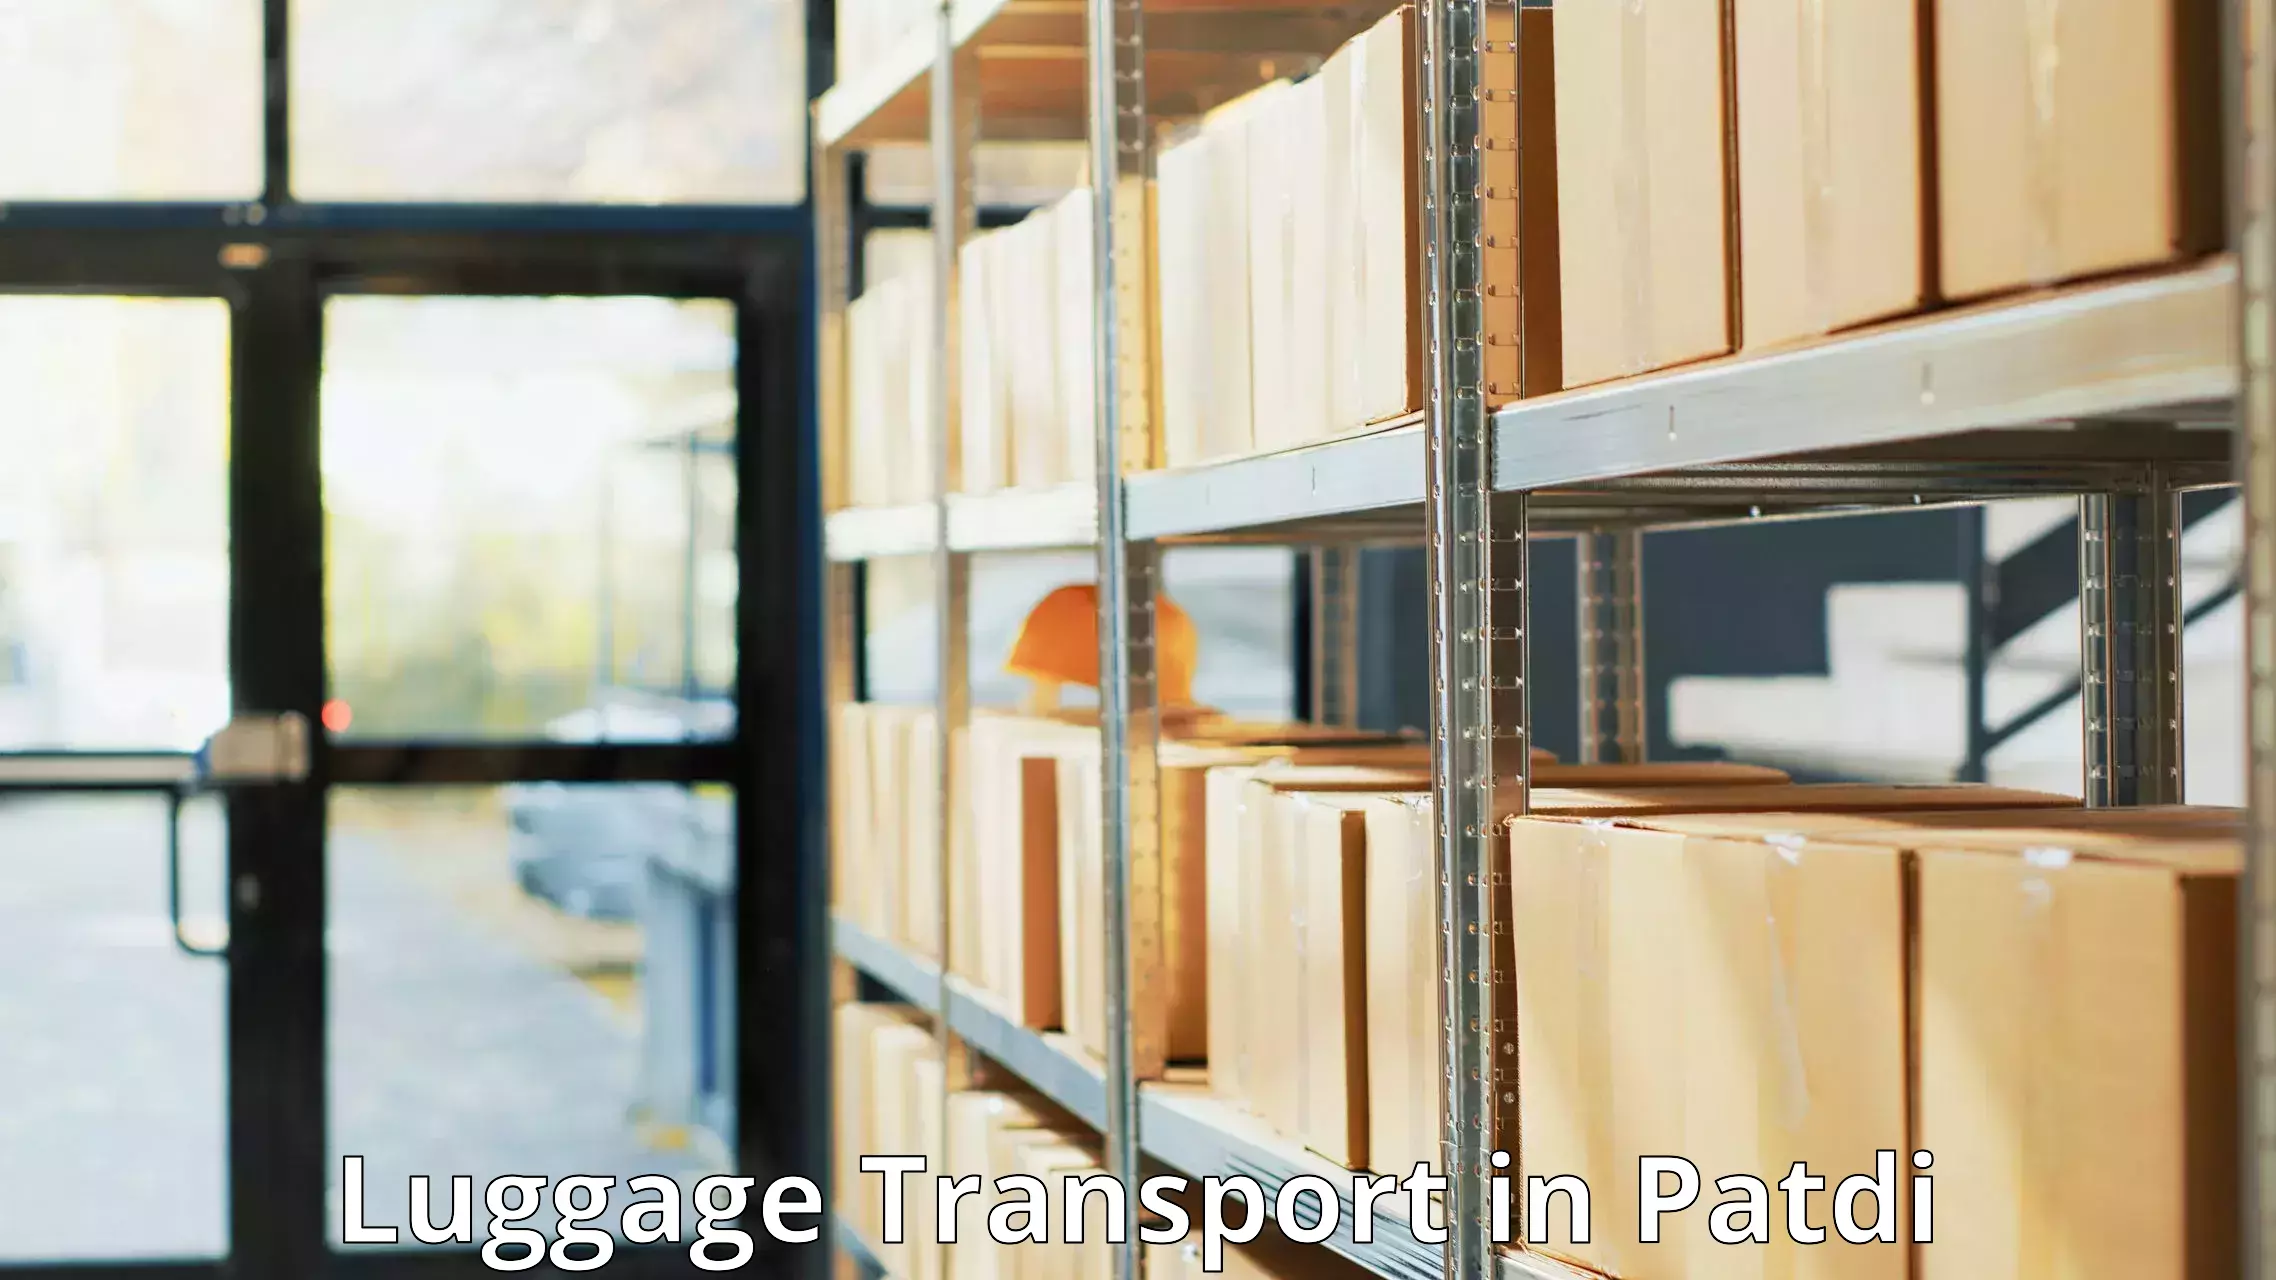 Baggage transport services in Patdi